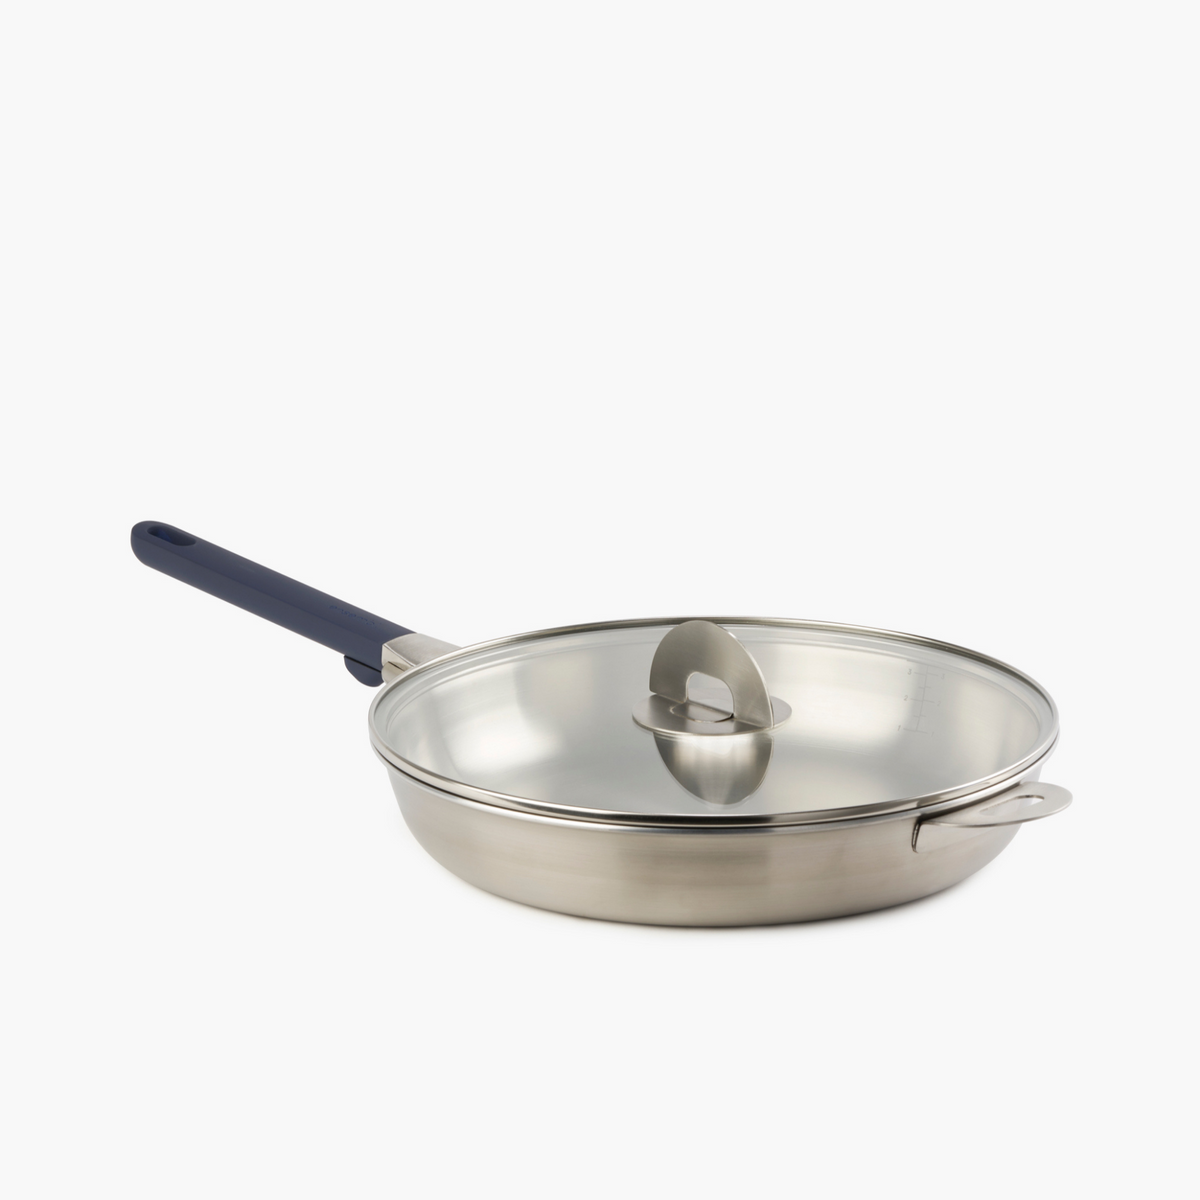 Frying Pan, Sturdy And Durable, 304 Stainless Steel, Outdoor Pot